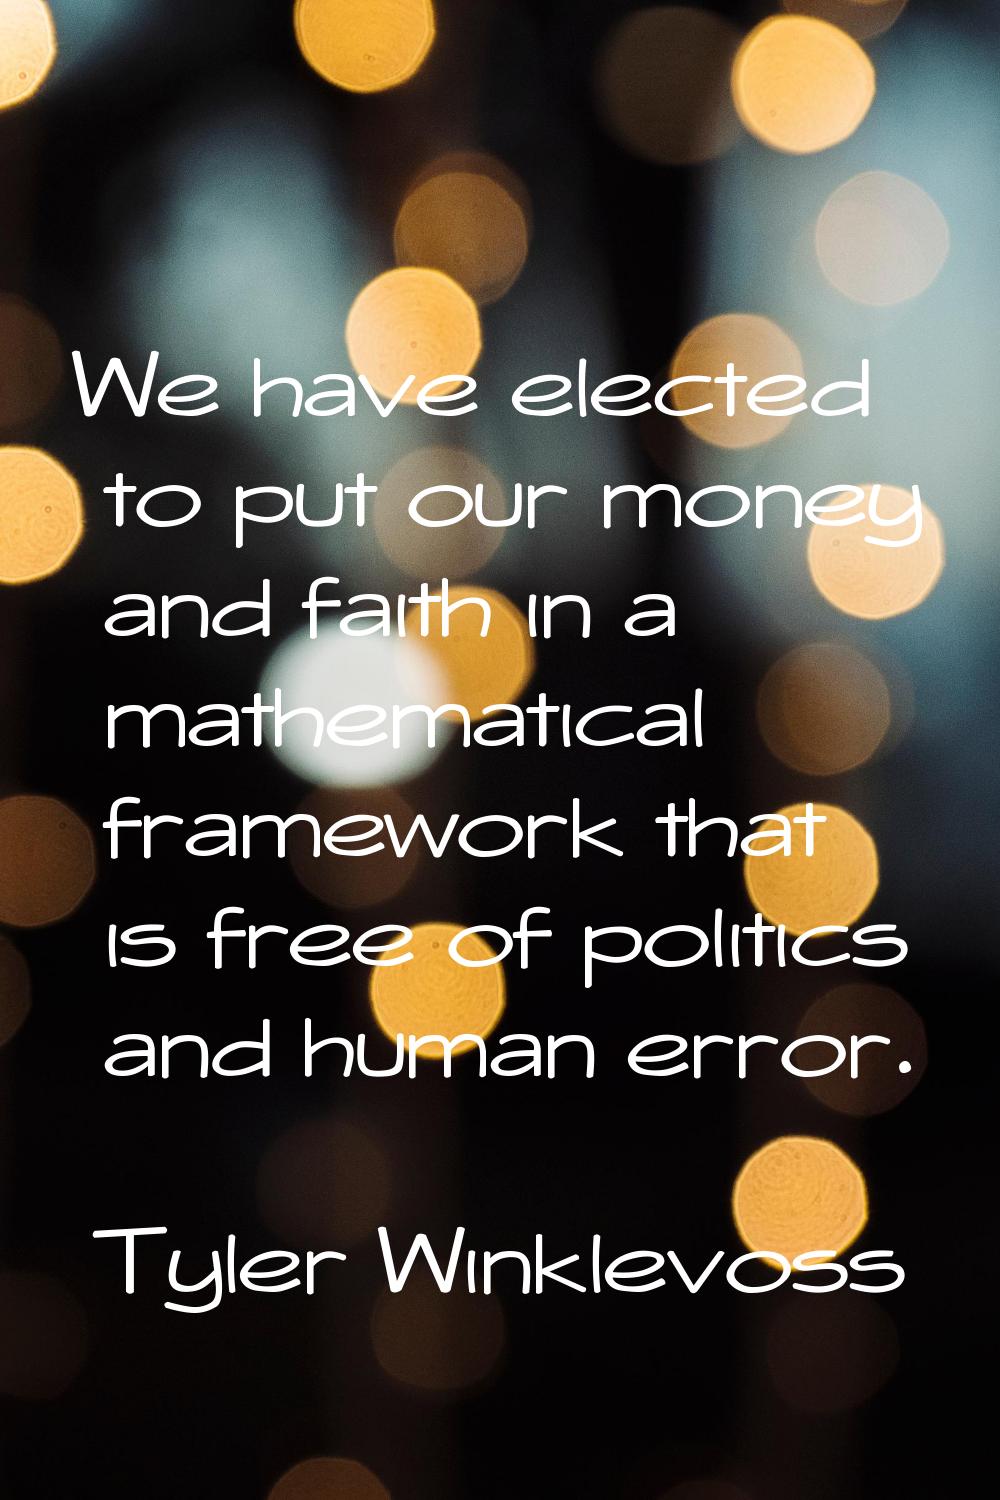 We have elected to put our money and faith in a mathematical framework that is free of politics and